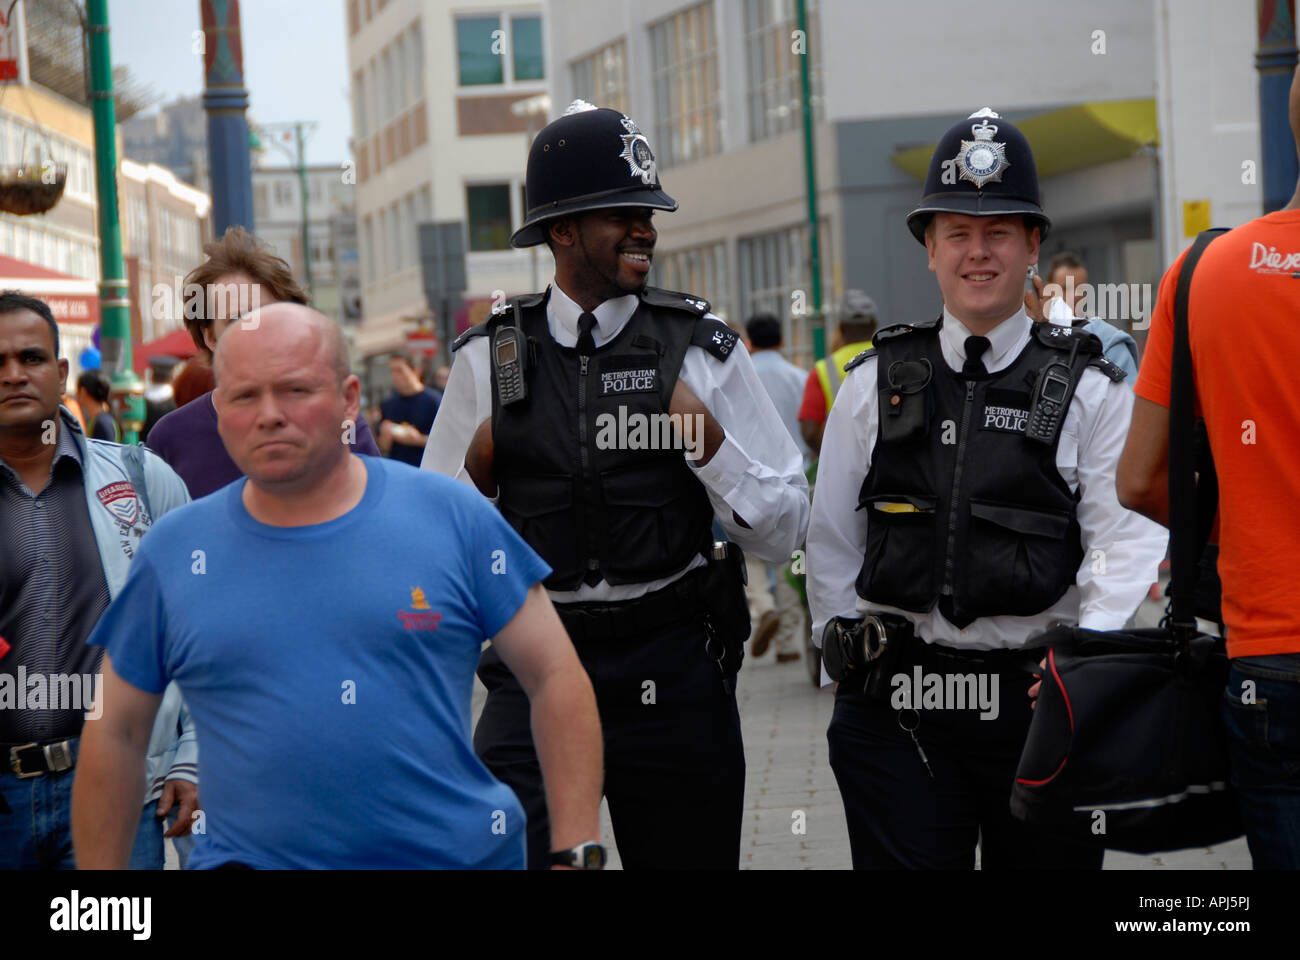 Brick lane on a busy Sunday with police and multiethnic crowd. Stock Photo